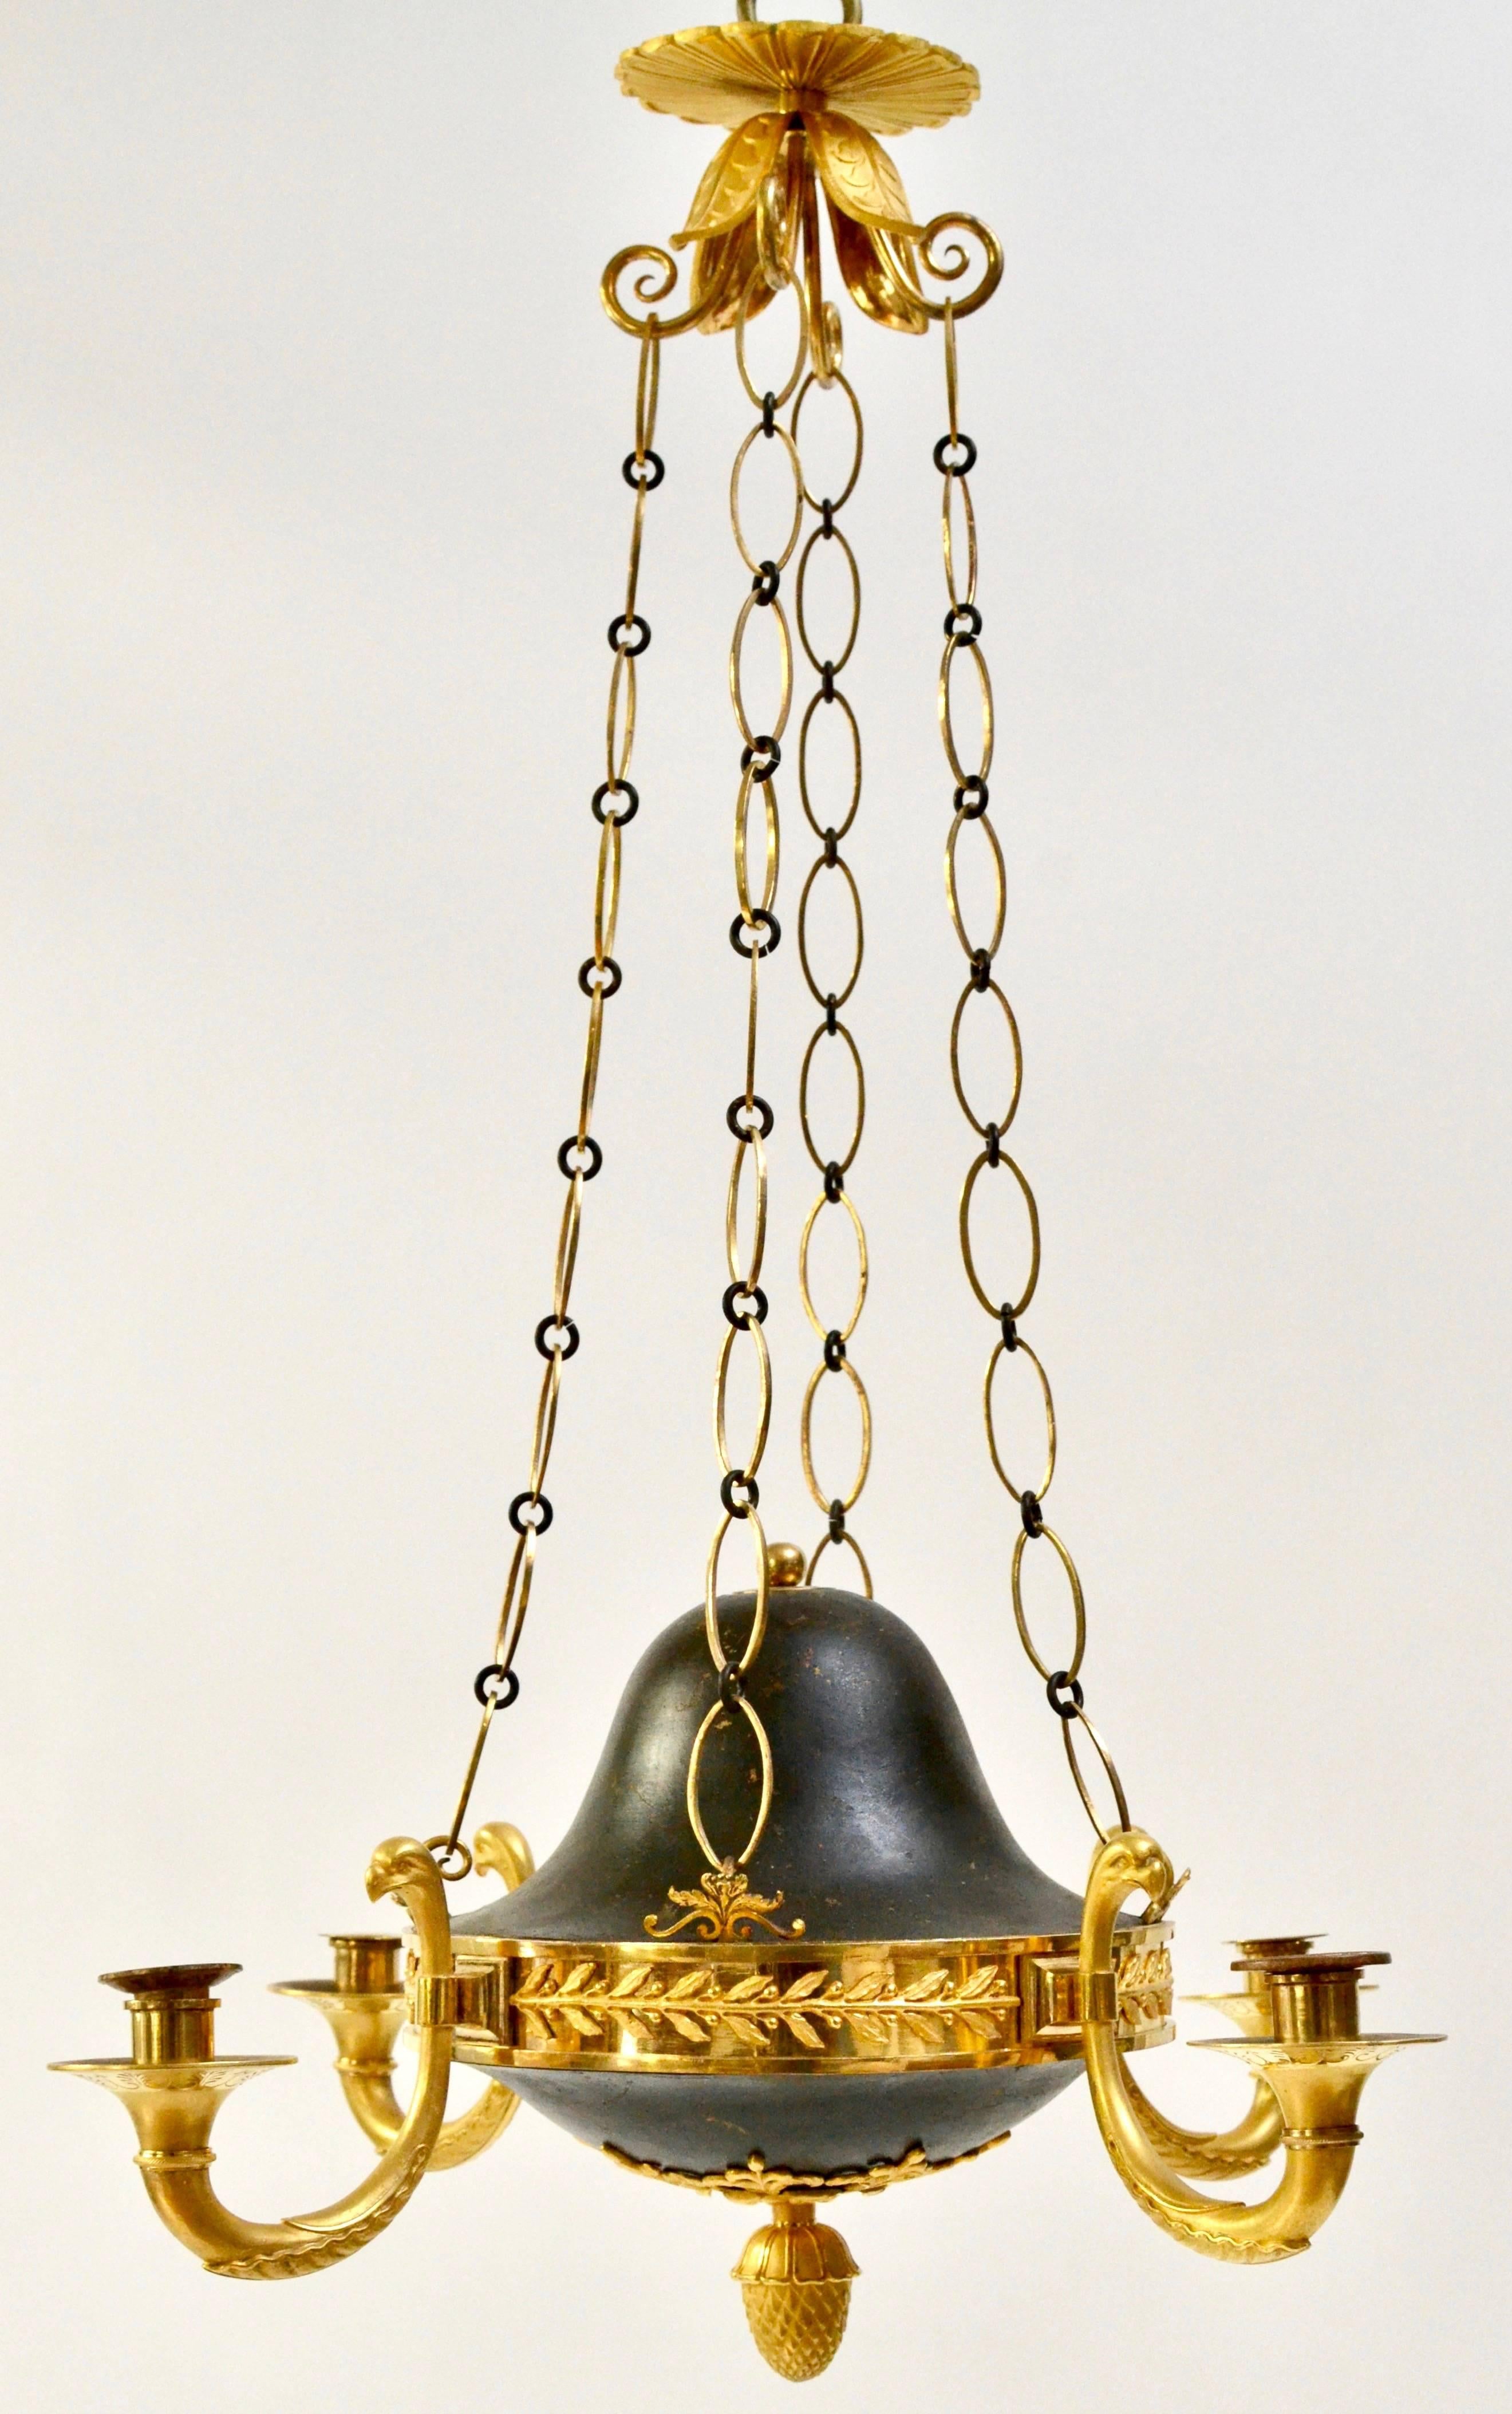 A fine and rare Russian gilt and patinated bronze chandelier from the Empire period, St Petersburg, circa 1810.